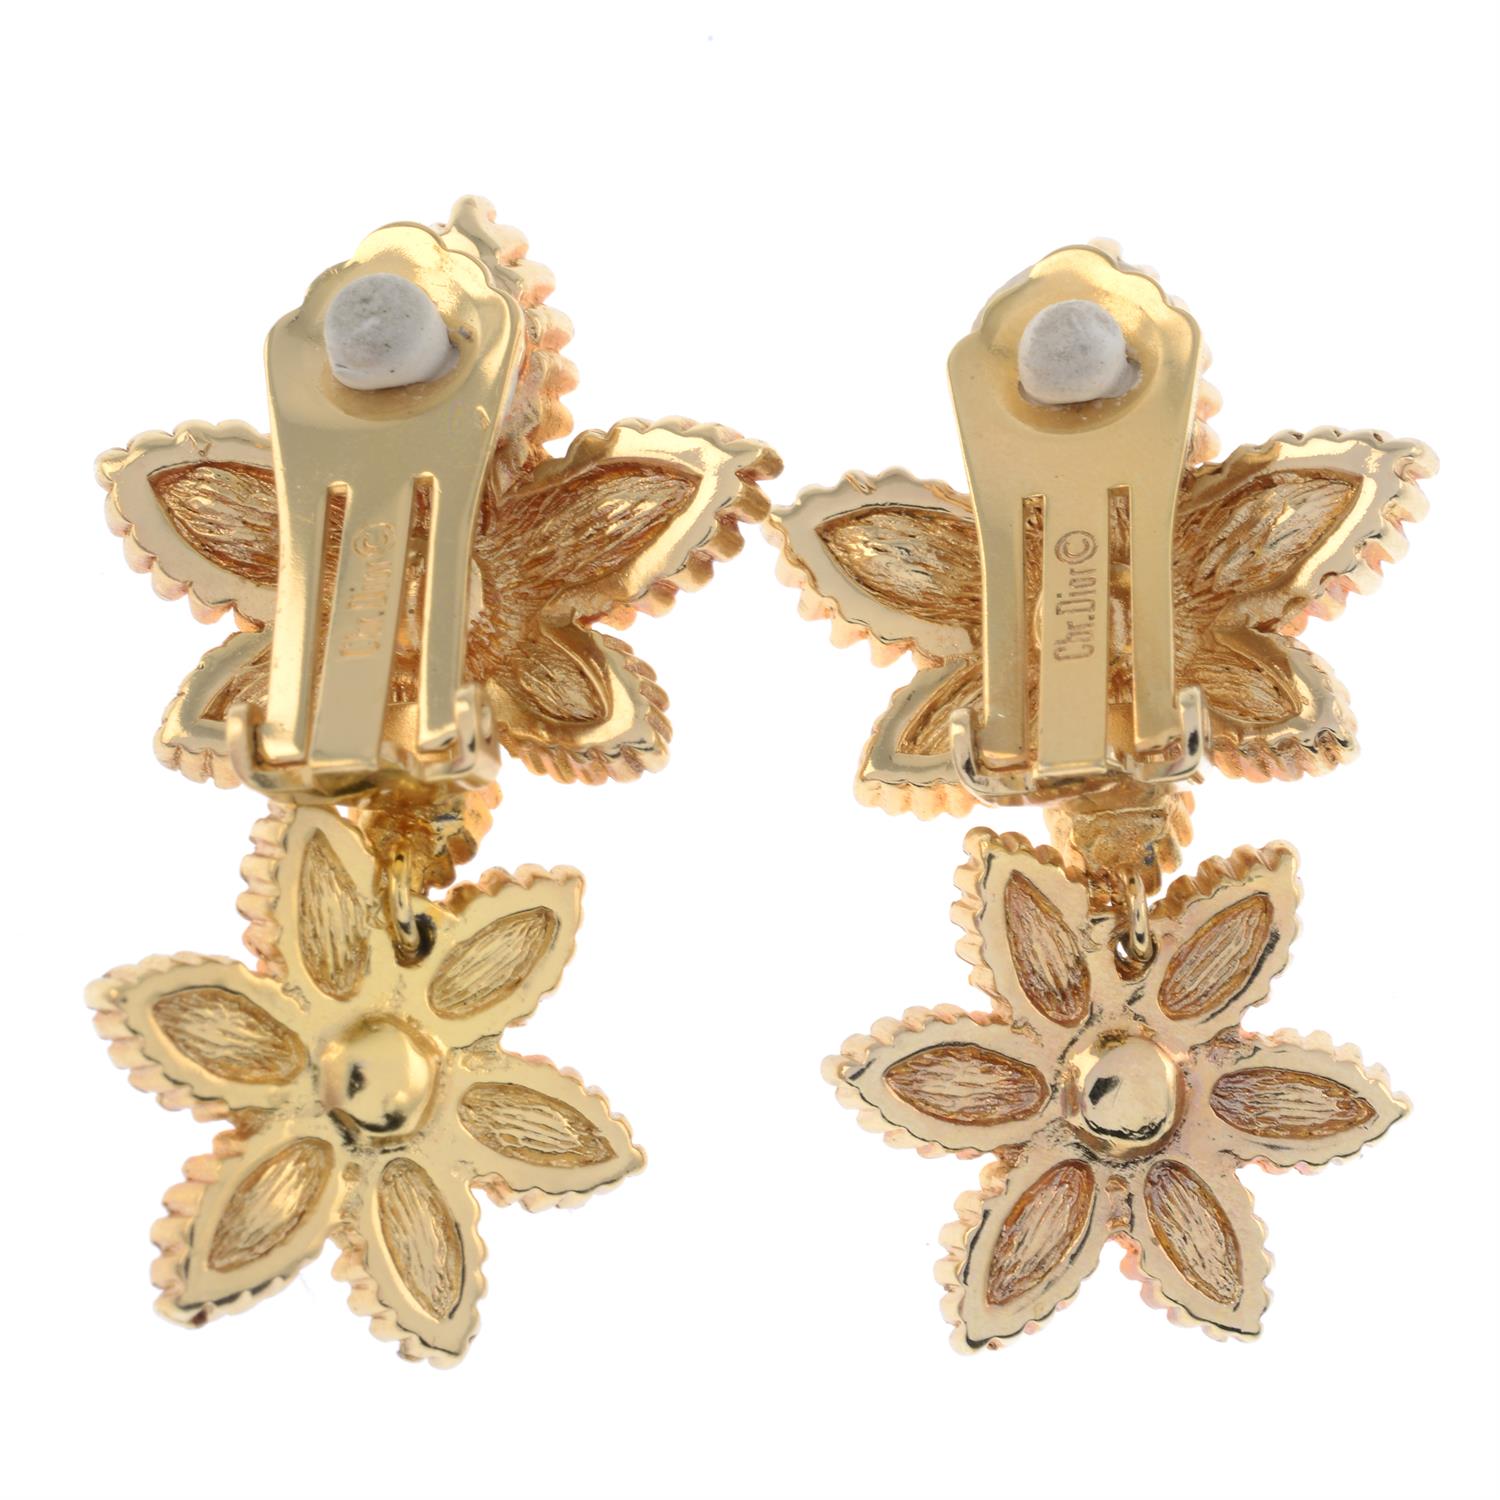 Christian Dior - clip-on earrings. - Image 2 of 3